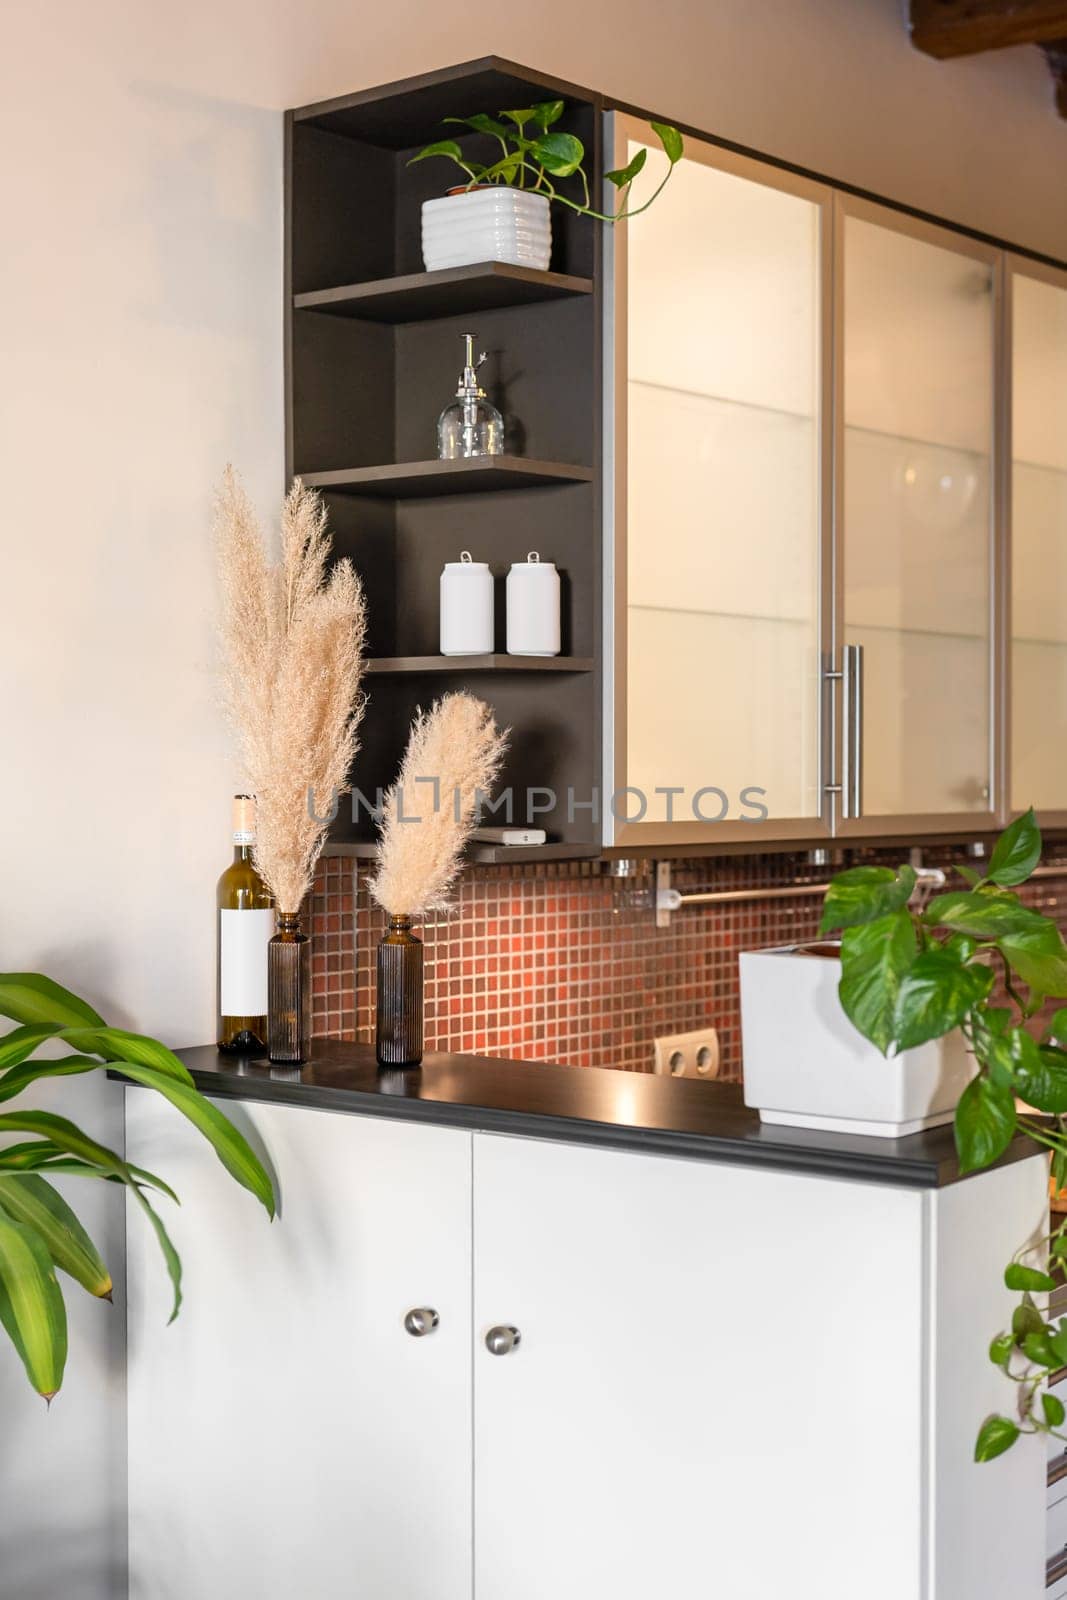 View of the mini bar with a built-in cabinet made of white painted wood in a small but cozy kitchen with plants and decor elements. Modern design in tiny spaces concept by apavlin